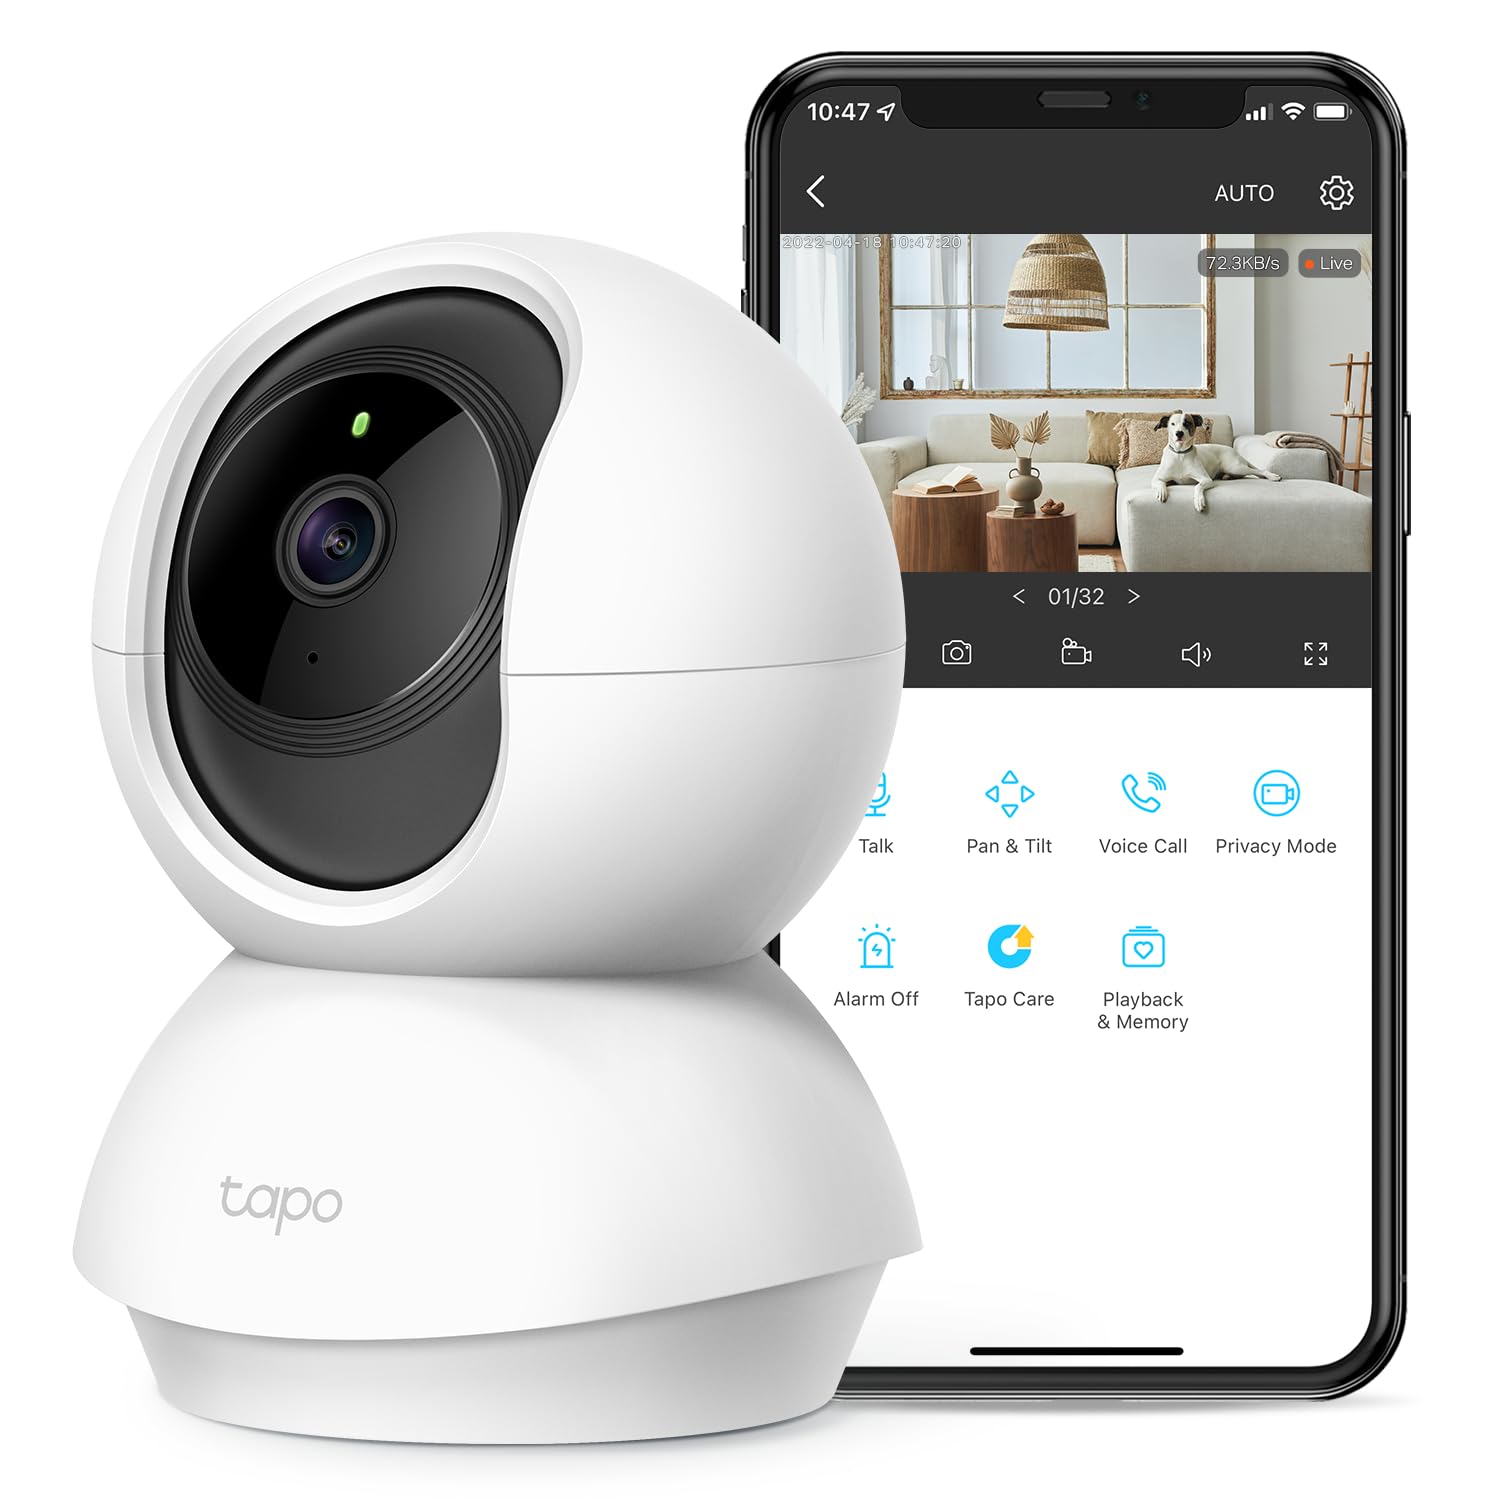 TP-Link Tapo 1080P Outdoor Wired Pan/Tilt Security Wi-Fi Camera, 360° View,  Motion Tracking Tapo C500